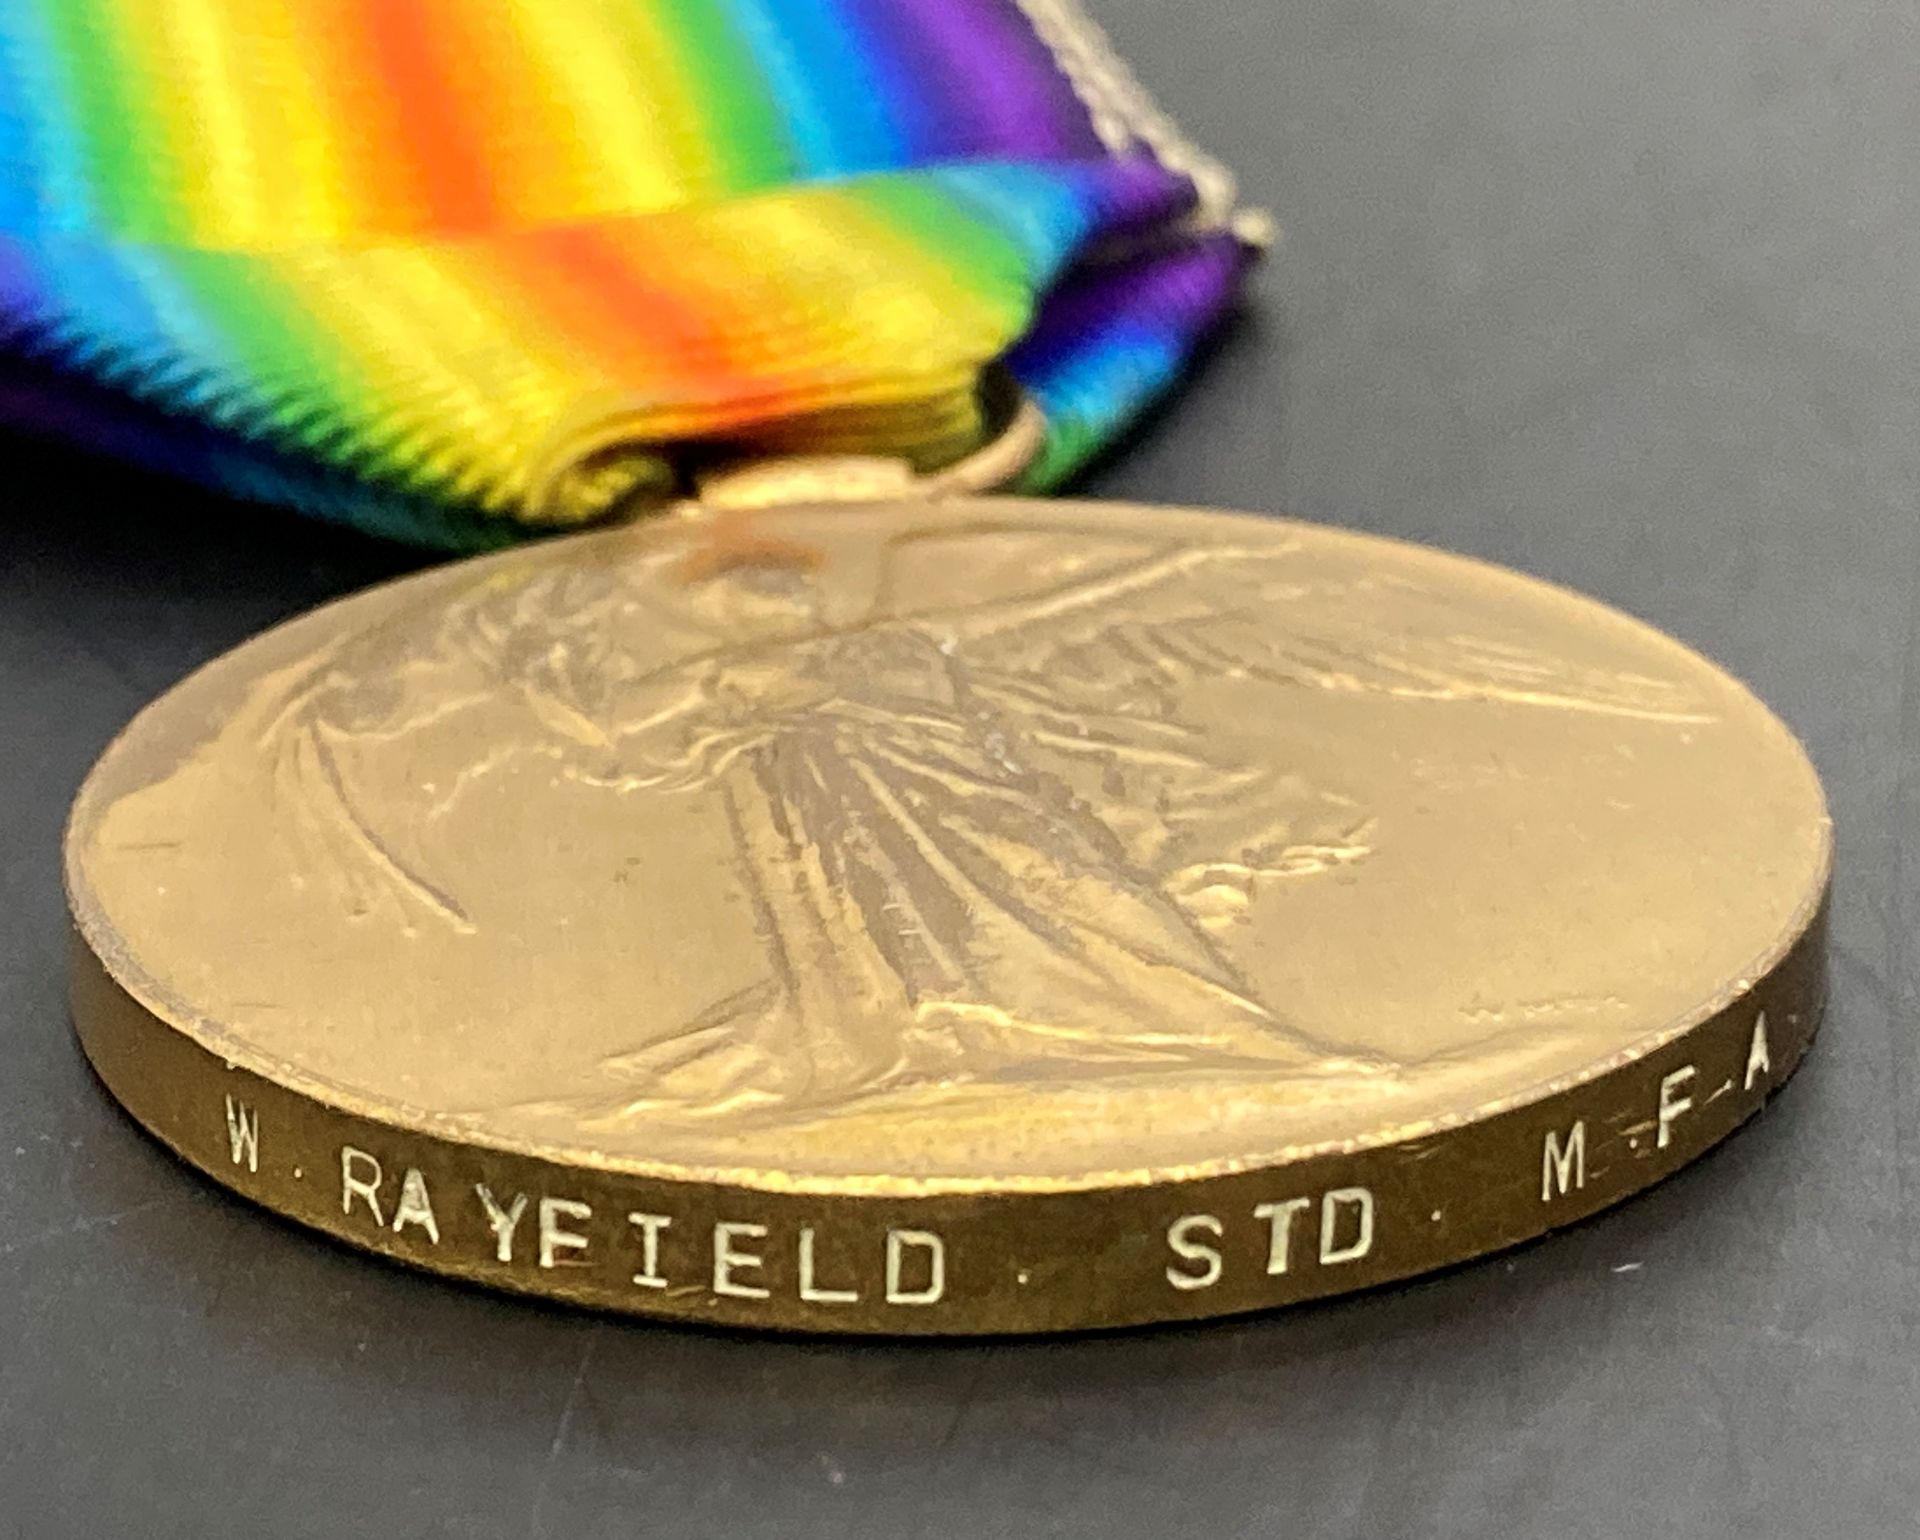 Two First World War medals - War Medal and Victory Medal complete with ribbons to W Rayfield Std - Image 2 of 4